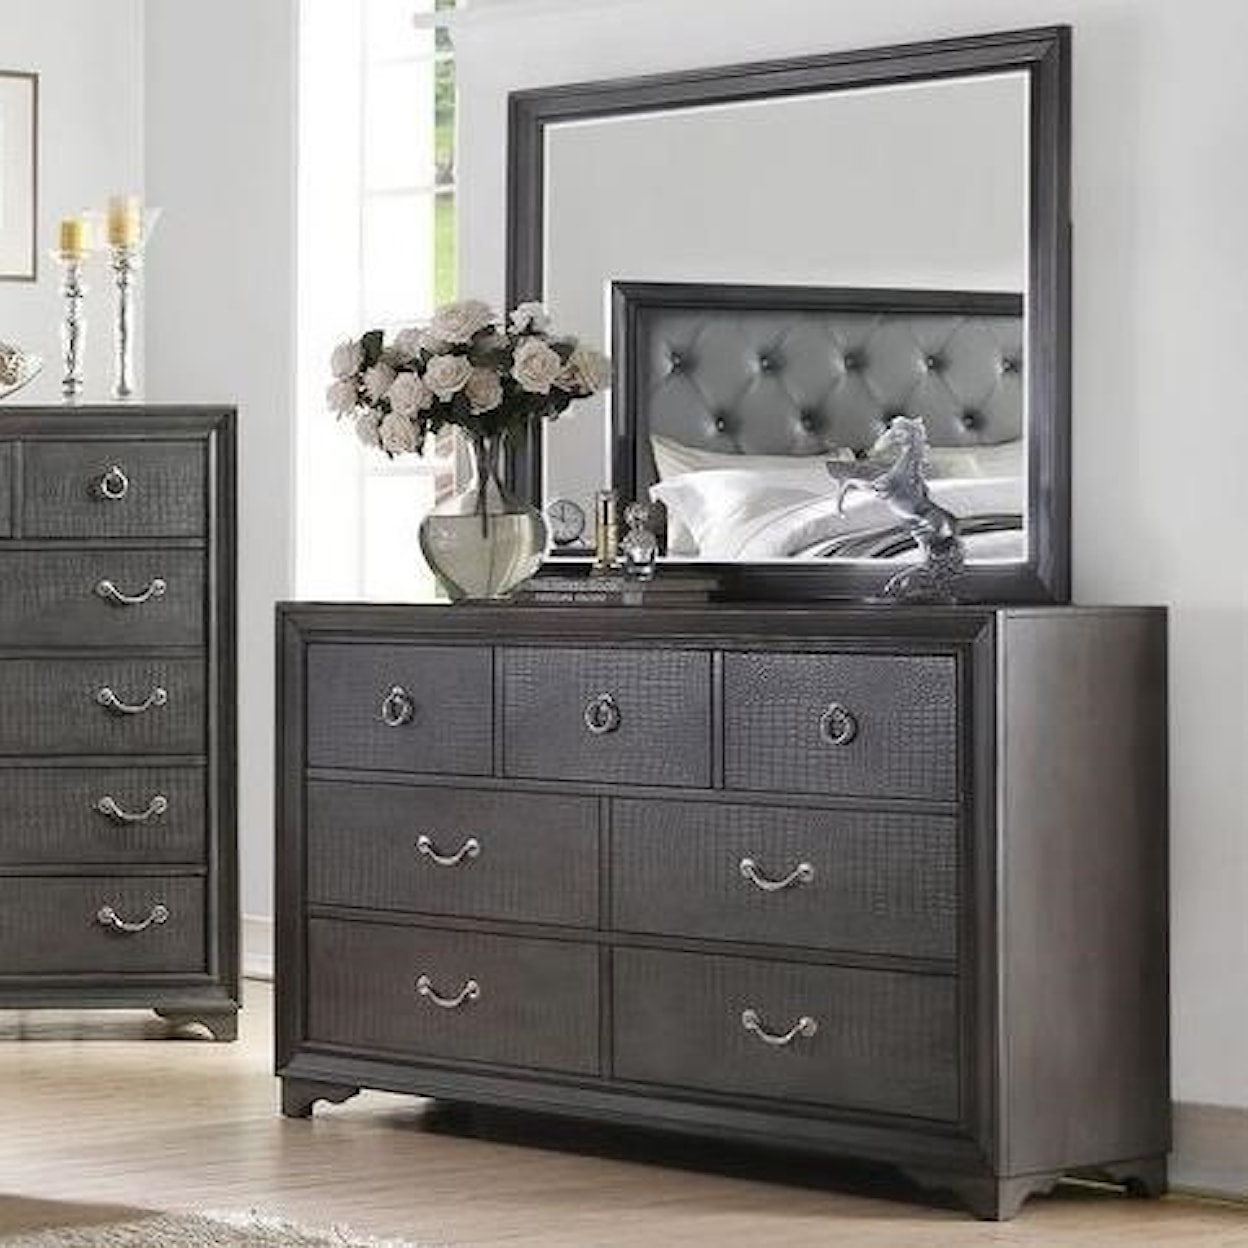 Avalon Furniture Rodeo Drive Dresser and Mirror Set